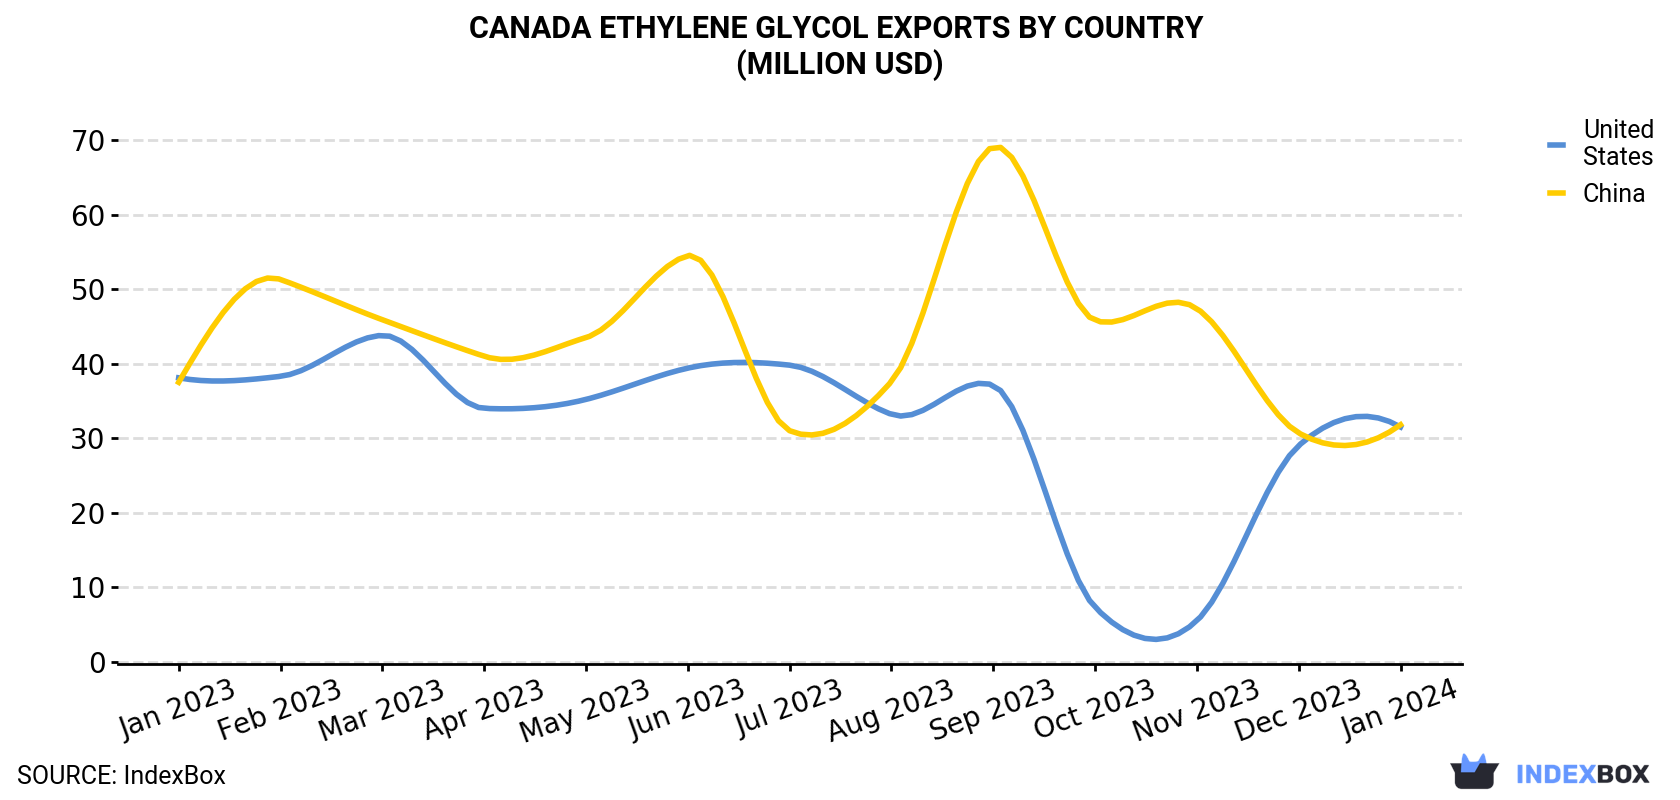 Canada Ethylene Glycol Exports By Country (Million USD)